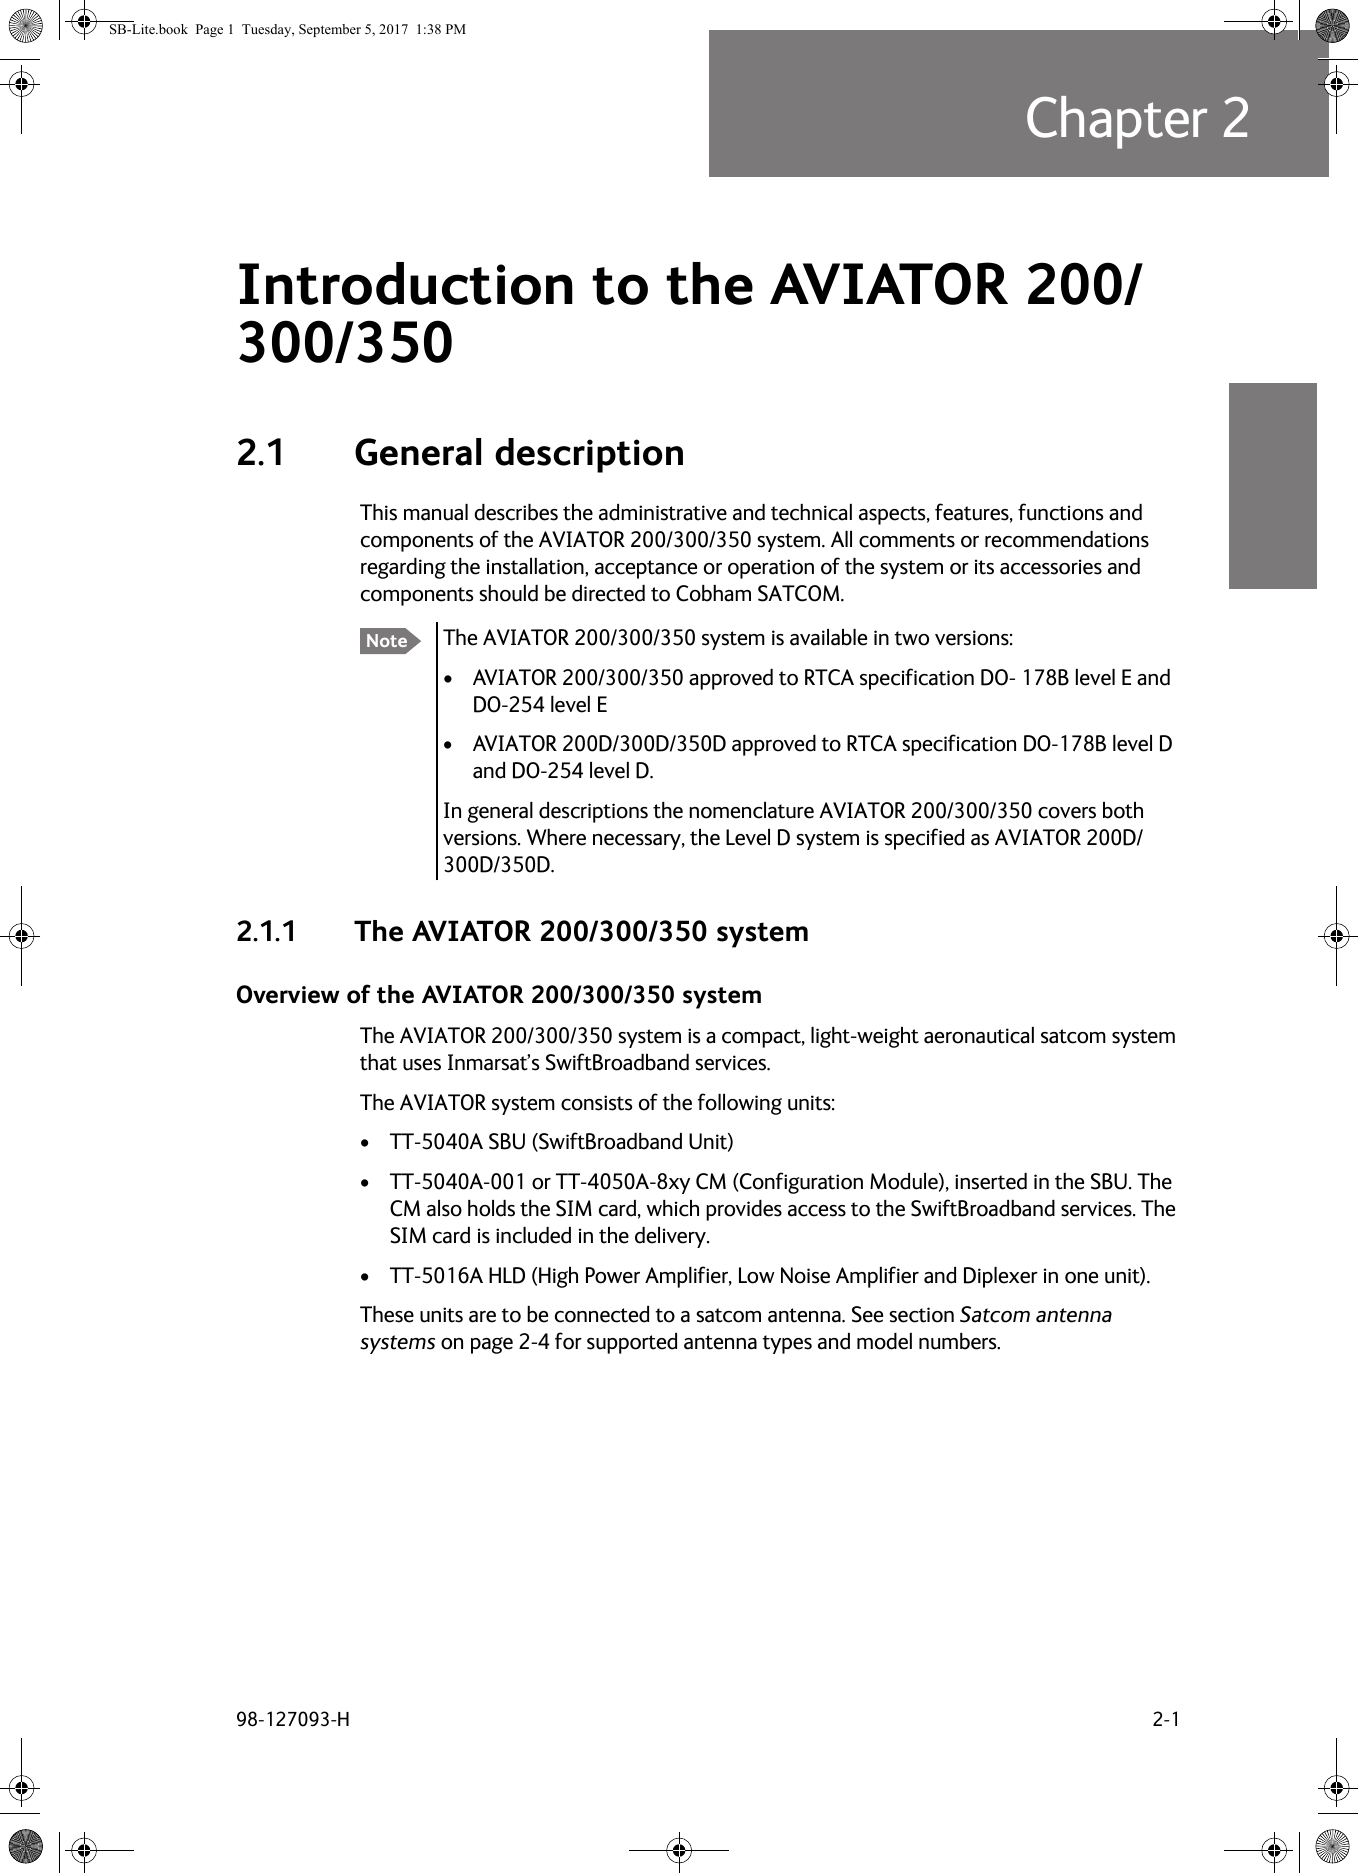 98-127093-H 2-1Chapter 22222Introduction to the AVIATOR  200/300/350 22.1 General descriptionThis manual describes the administrative and technical aspects, features, functions and components of the AVIATOR  200/300/350 system. All comments or recommendations regarding the installation, acceptance or operation of the system or its accessories and components should be directed to Cobham SATCOM.The AVIATOR  200/300/350 system is available in two versions: • AVIATOR  200/300/350 approved to RTCA specification DO- 178B level E and DO-254 level E• AVIATOR  200D/300D/350D approved to RTCA specification DO-178B level D and DO-254 level D.In general descriptions the nomenclature AVIATOR  200/300/350 covers both versions. Where necessary, the Level D system is specified as AVIATOR  200D/300D/350D.2.1.1 The AVIATOR 200/300/350 systemOverview of the AVIATOR 200/300/350 systemThe AVIATOR 200/300/350 system is a compact, light-weight aeronautical satcom system that uses Inmarsat’s SwiftBroadband services.The AVIATOR system consists of the following units:• TT-5040A SBU (SwiftBroadband Unit)• TT-5040A-001 or TT-4050A-8xy CM (Configuration Module), inserted in the SBU. The CM also holds the SIM card, which provides access to the SwiftBroadband services. The SIM card is included in the delivery.• TT-5016A HLD (High Power Amplifier, Low Noise Amplifier and Diplexer in one unit). These units are to be connected to a satcom antenna. See section Satcom antenna systems on page  2-4 for supported antenna types and model numbers.NoteSB-Lite.book  Page 1  Tuesday, September 5, 2017  1:38 PM